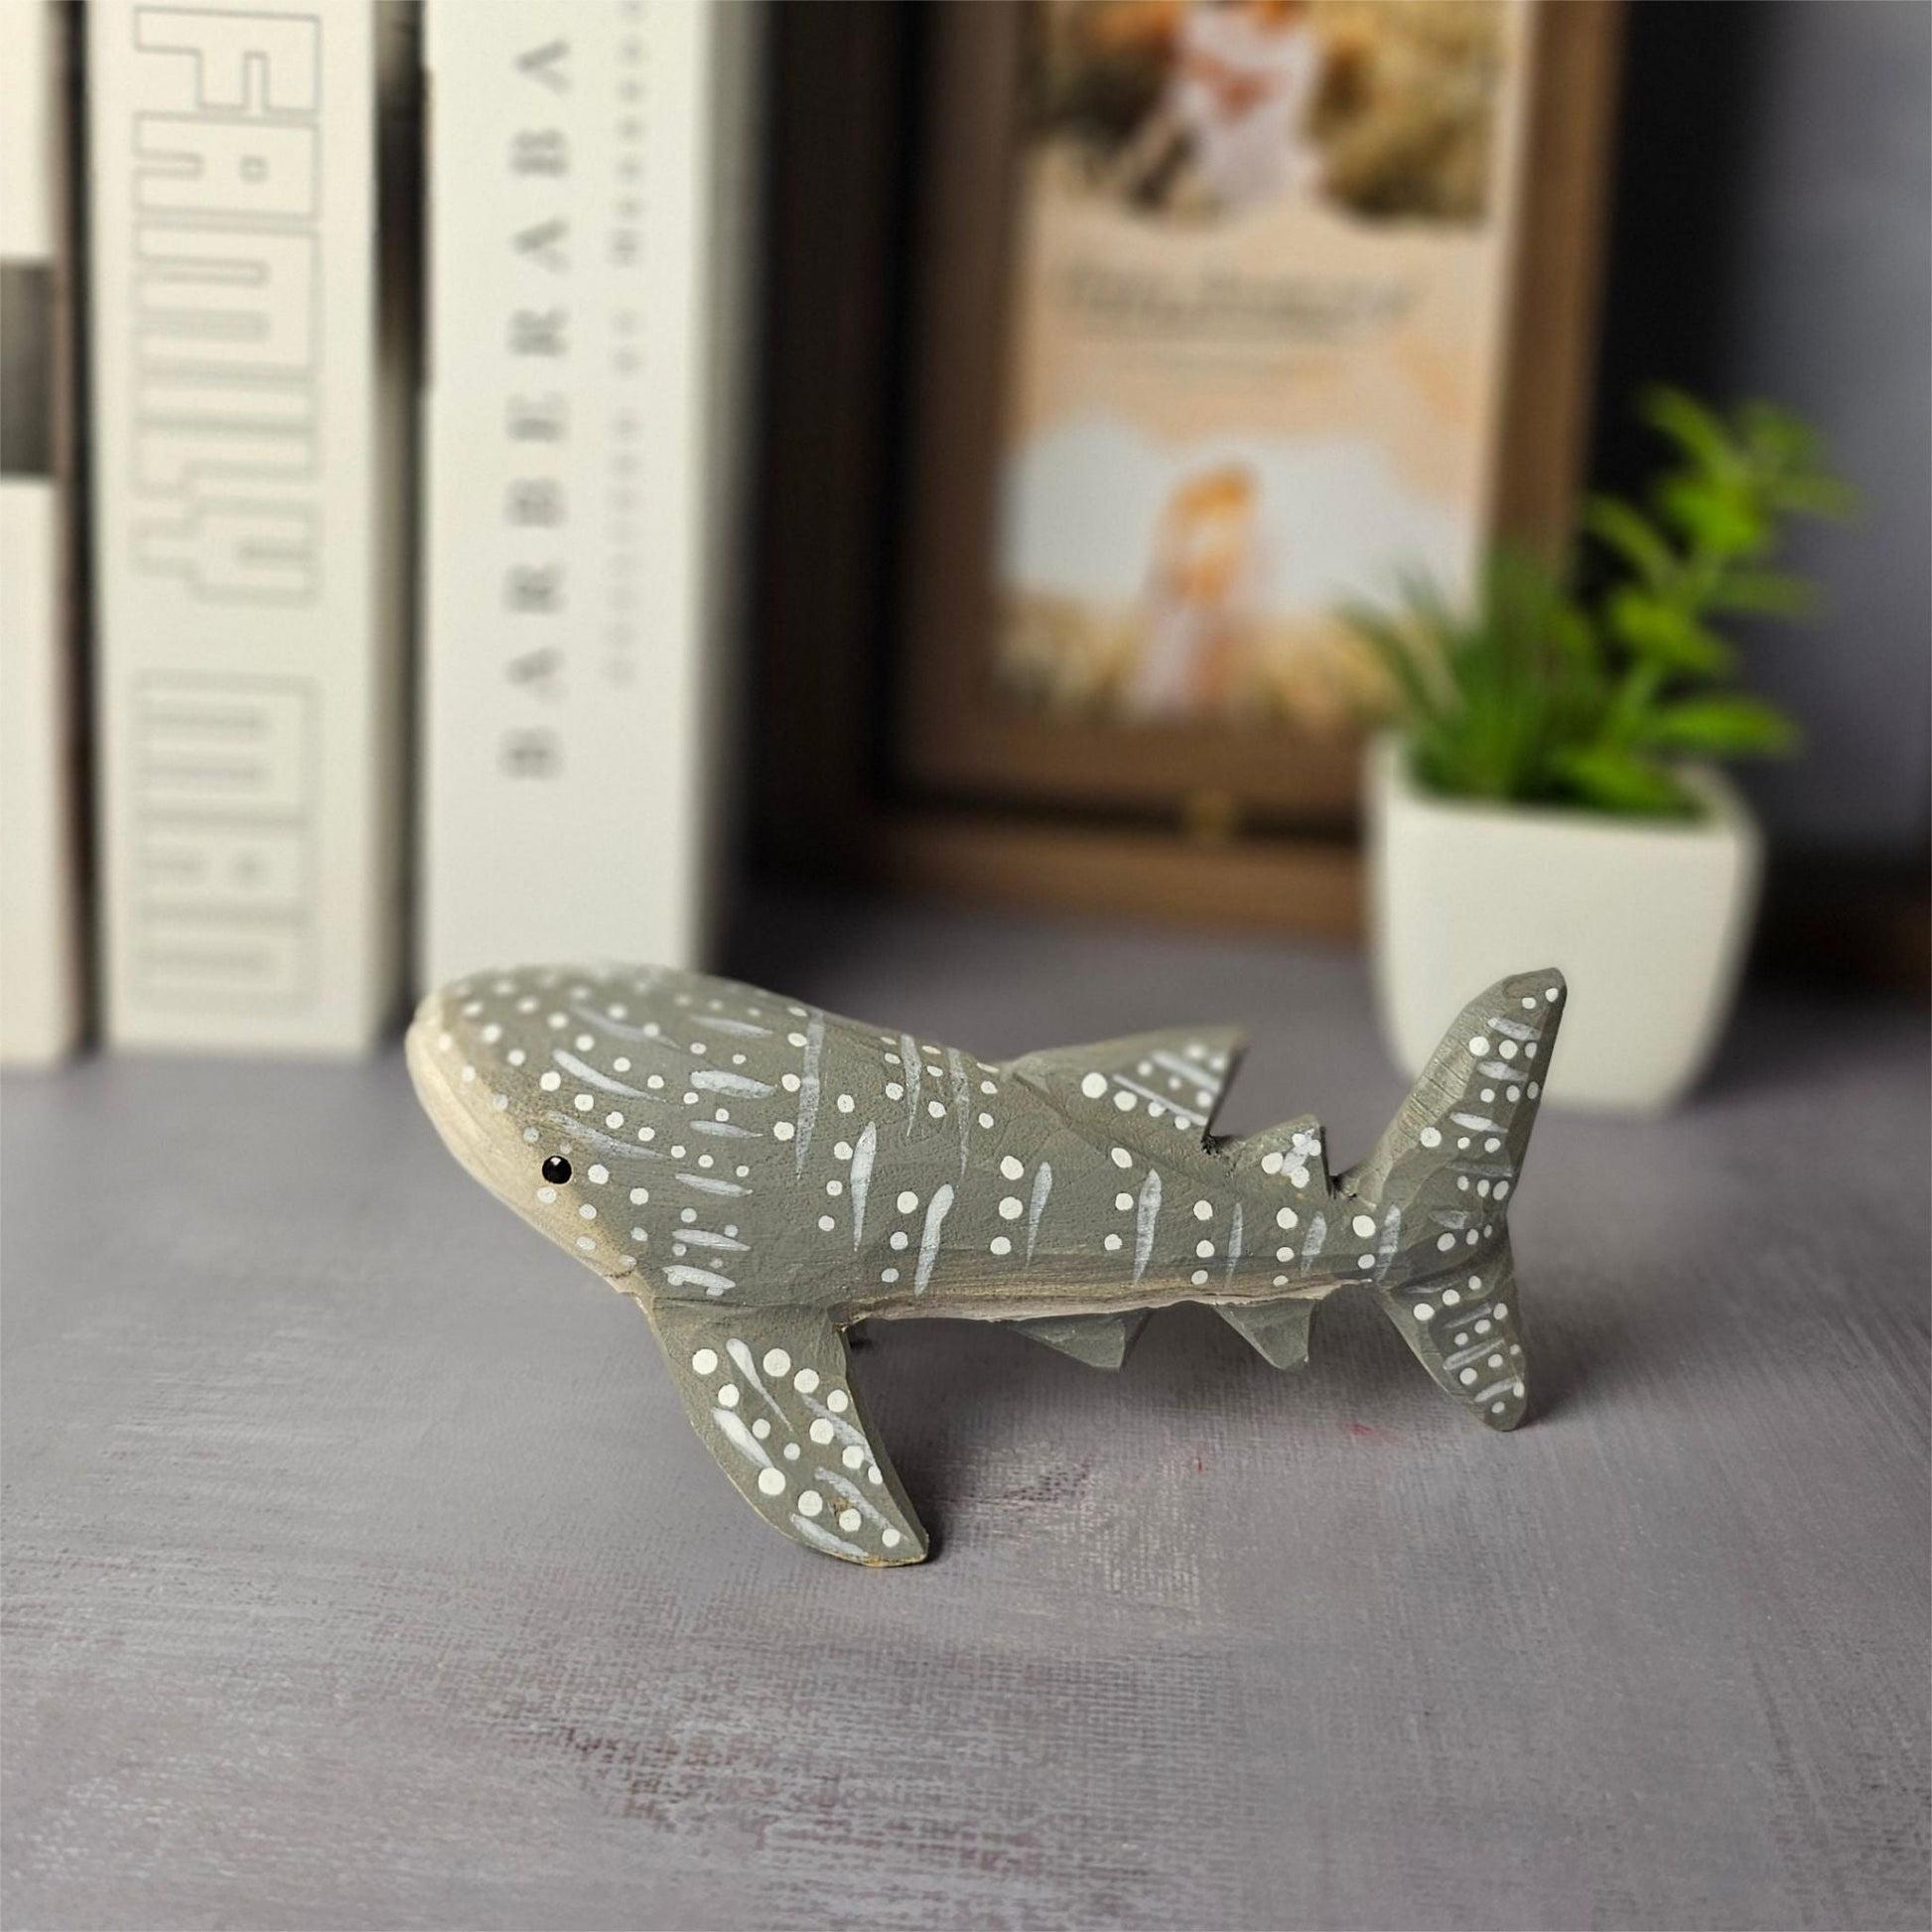 Whale-Shark Hand-Carved Figurine - Wooden Islands